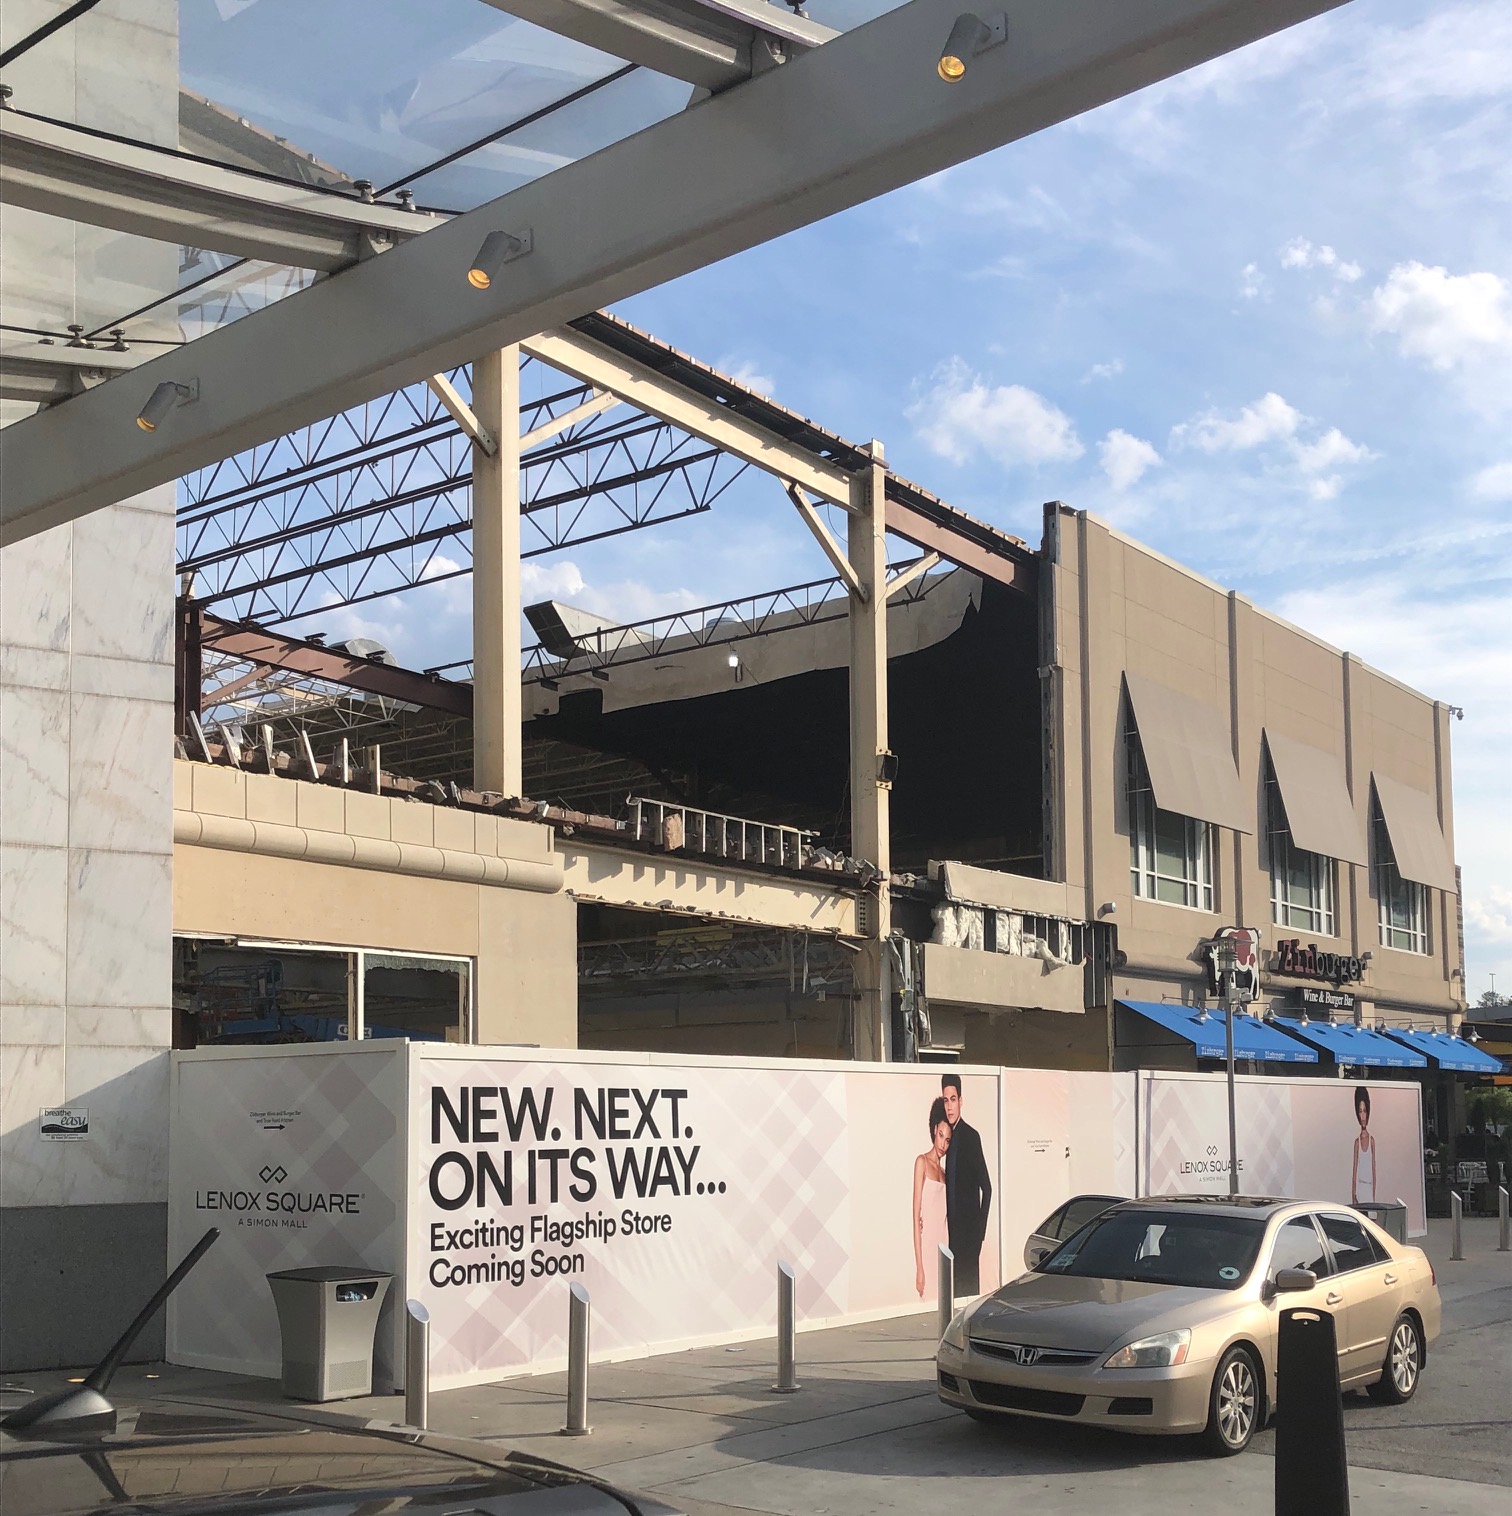 Lenox Square leasing boom, lineup of new retailers